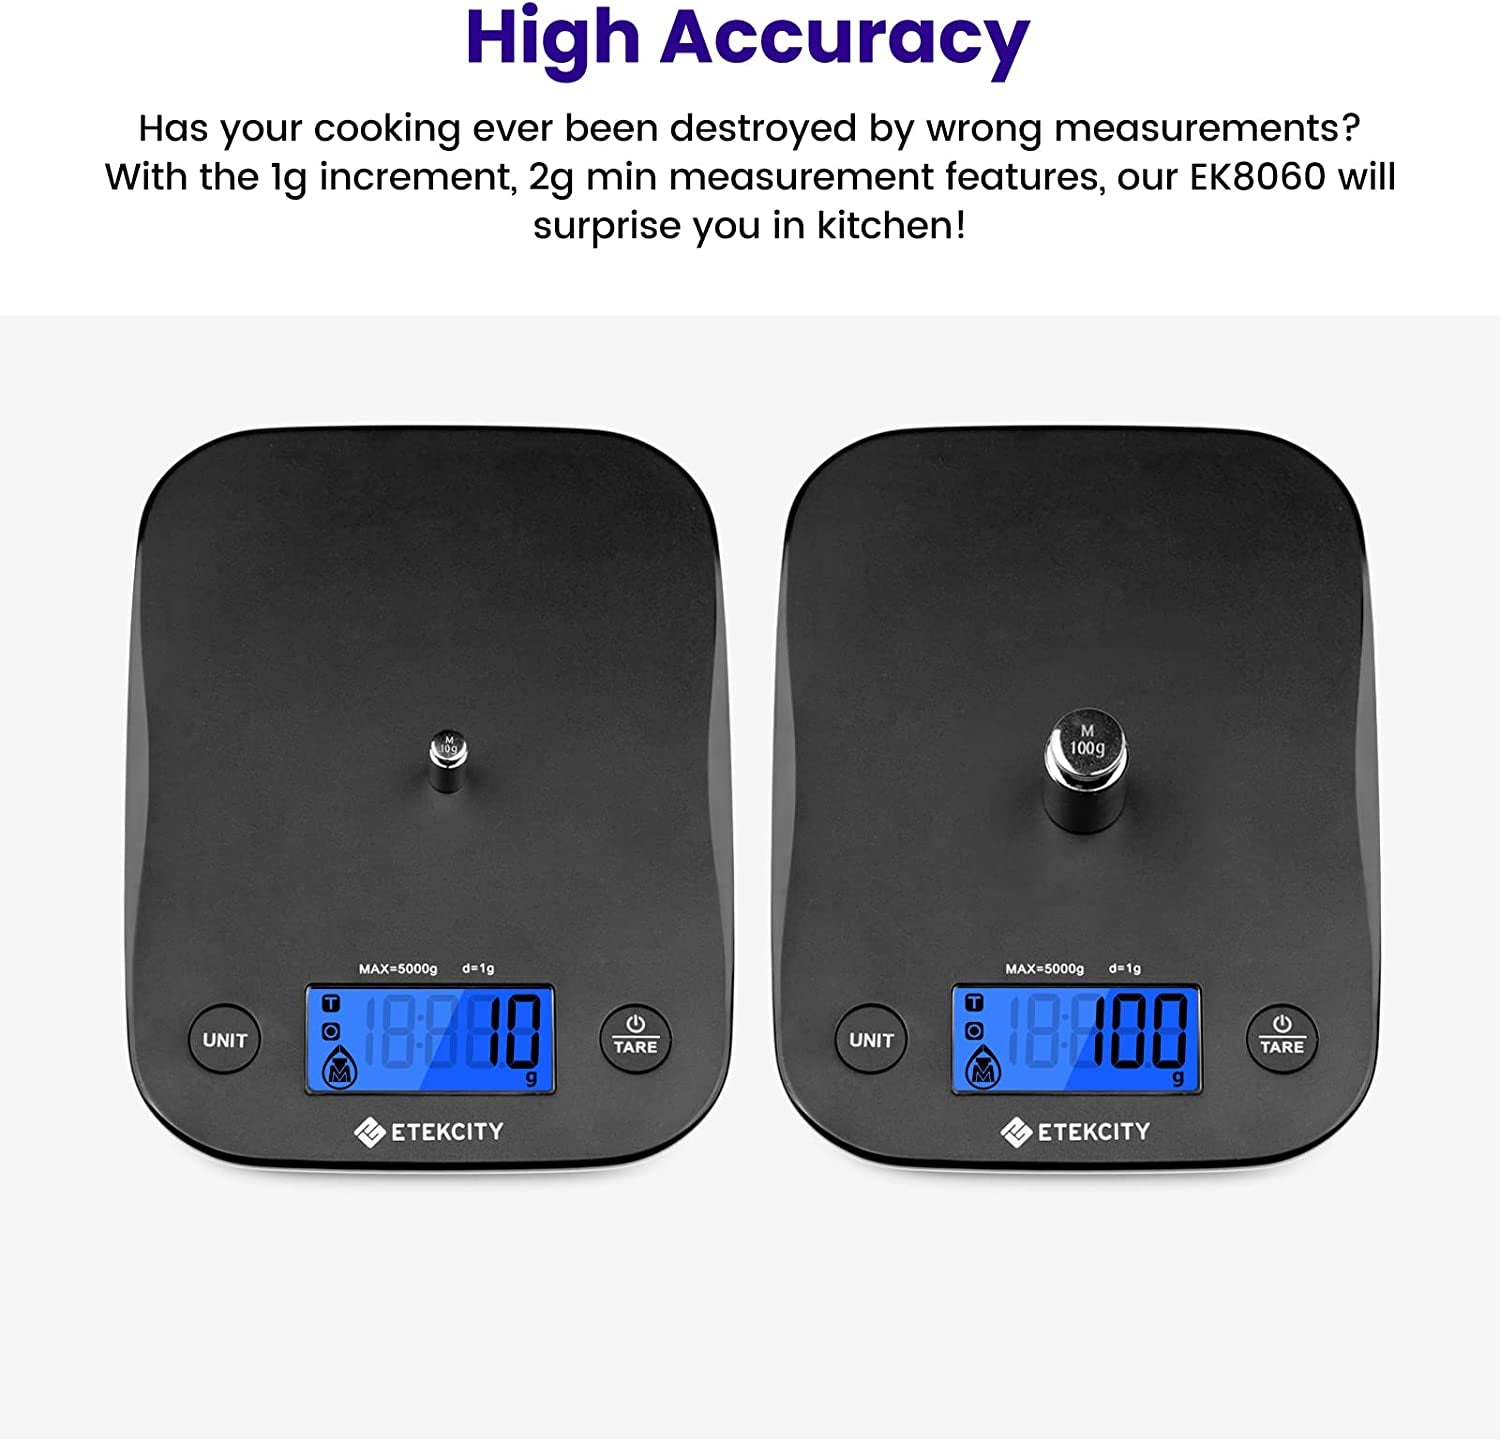 Digital Food Kitchen Scale for Precision Weight Measurement in Grams and Ounces - Ideal for Cooking, Baking, Meal Preparation, and Dietary Needs - Medium Size - Carbon Black Color